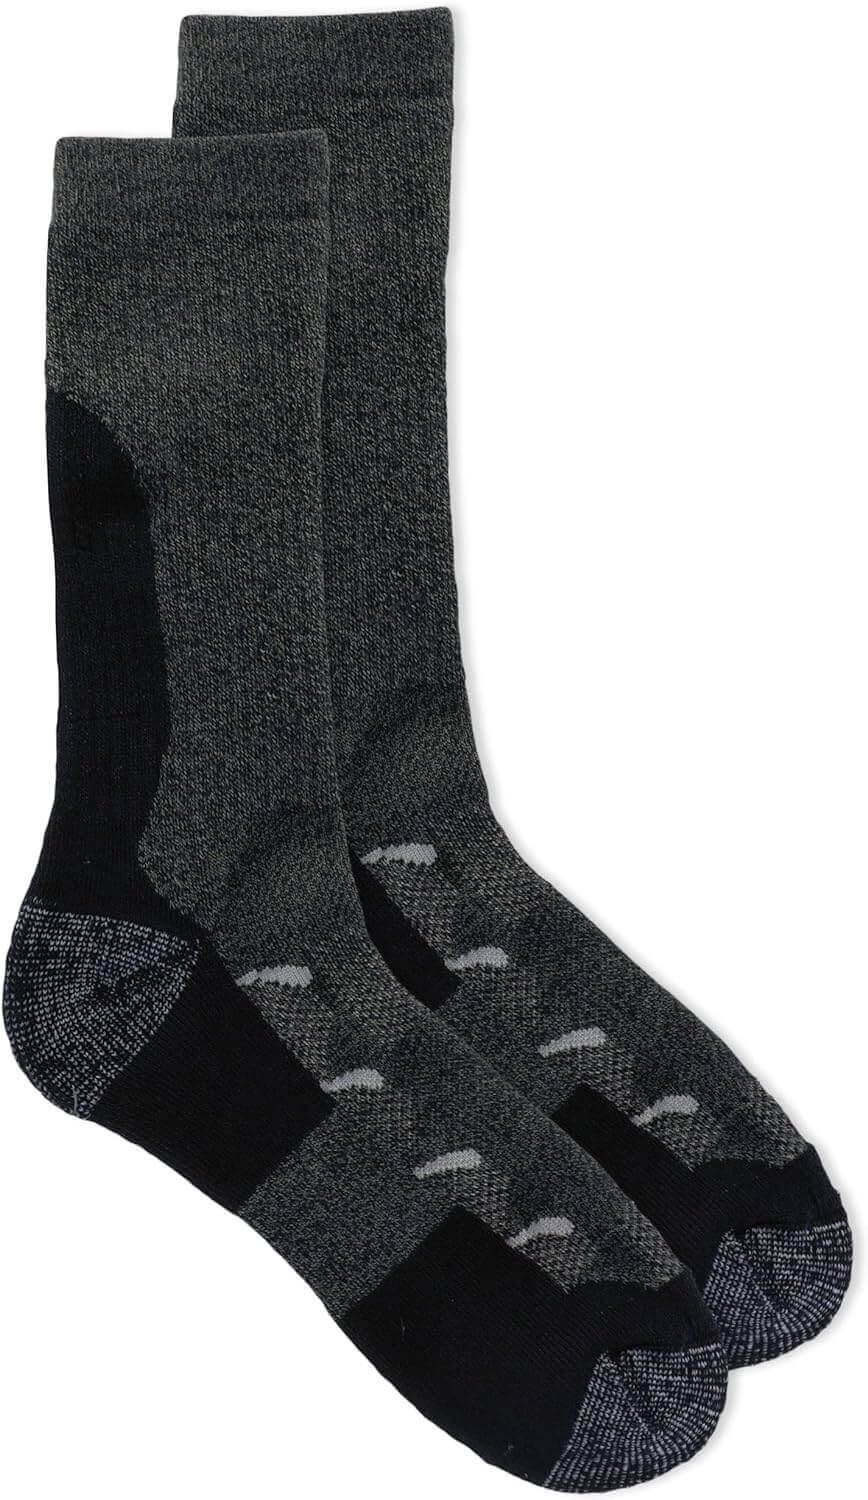 Shop The Latest >Merrell Men's and Women's Moab Hiking Mid Cushion Socks > *Only $21.90*> From The Top Brand > *Merrelll* > Shop Now and Get Free Shipping On Orders Over $45.00 >*Shop Earth Foot*